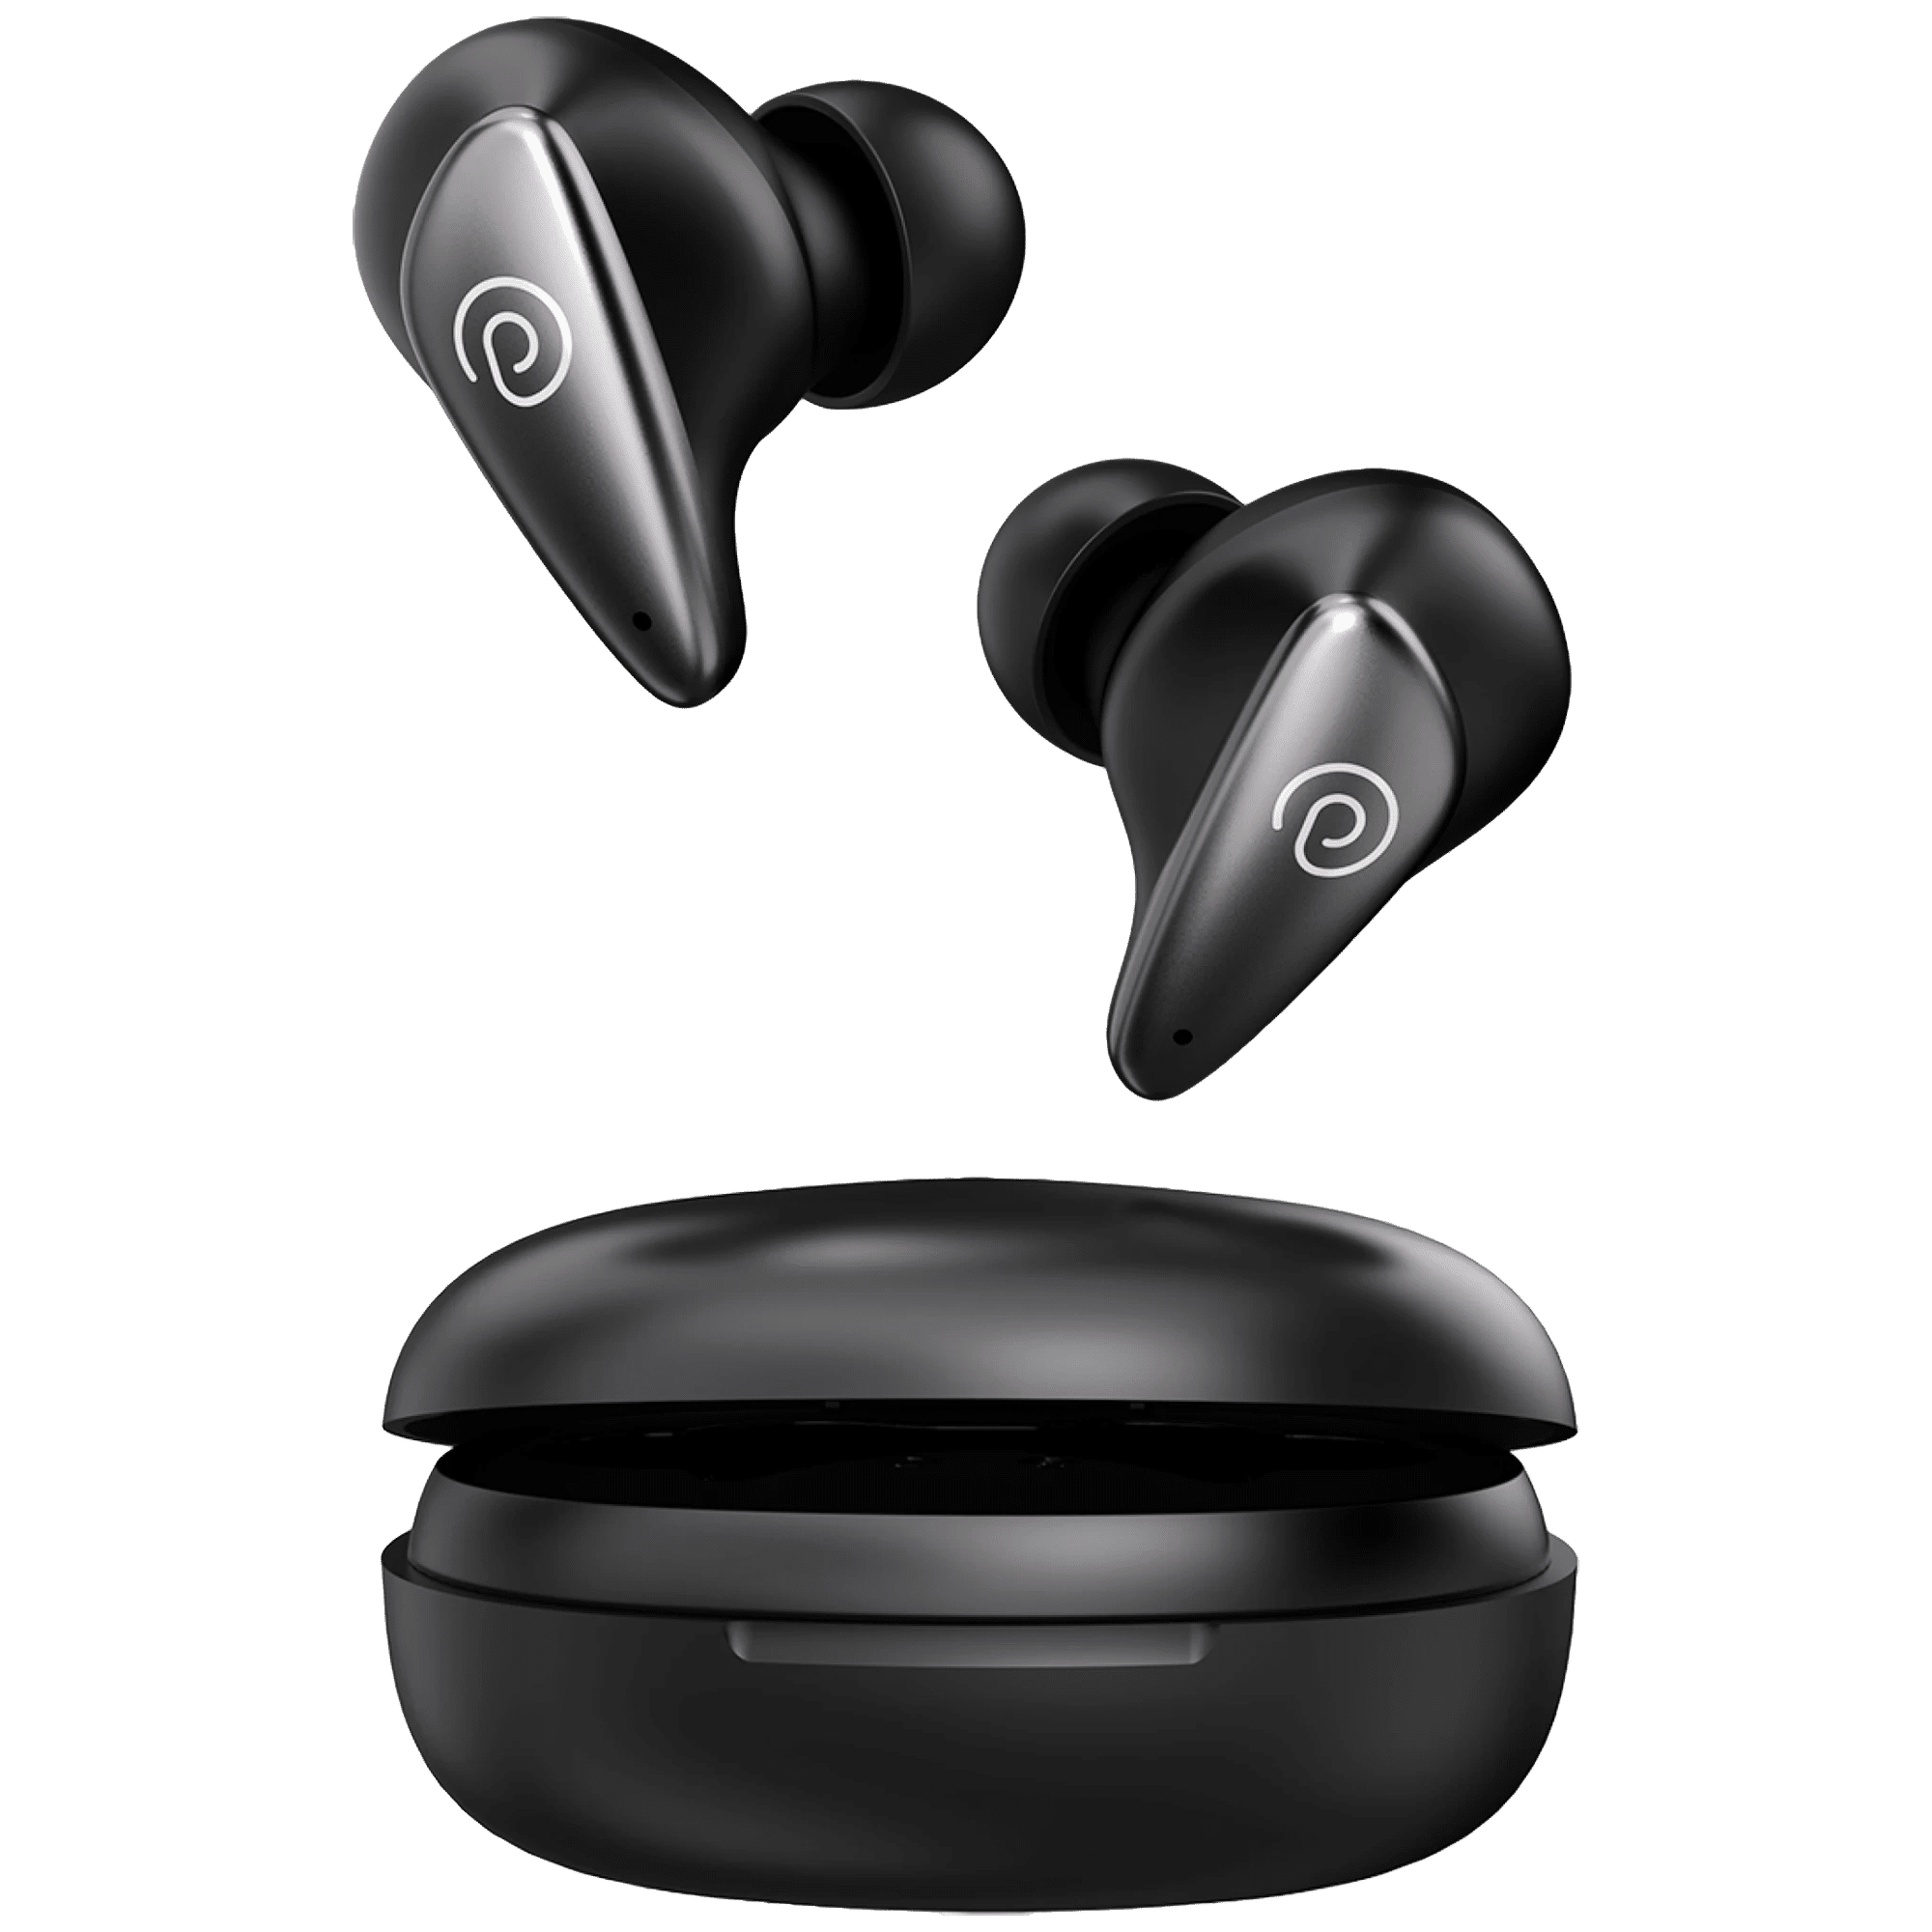 pTron Bassbuds Verse 140318592 TWS Earbuds with Environmental Noise Cancellation (IPX4 Water Resistant, Stereo Calls, Black)